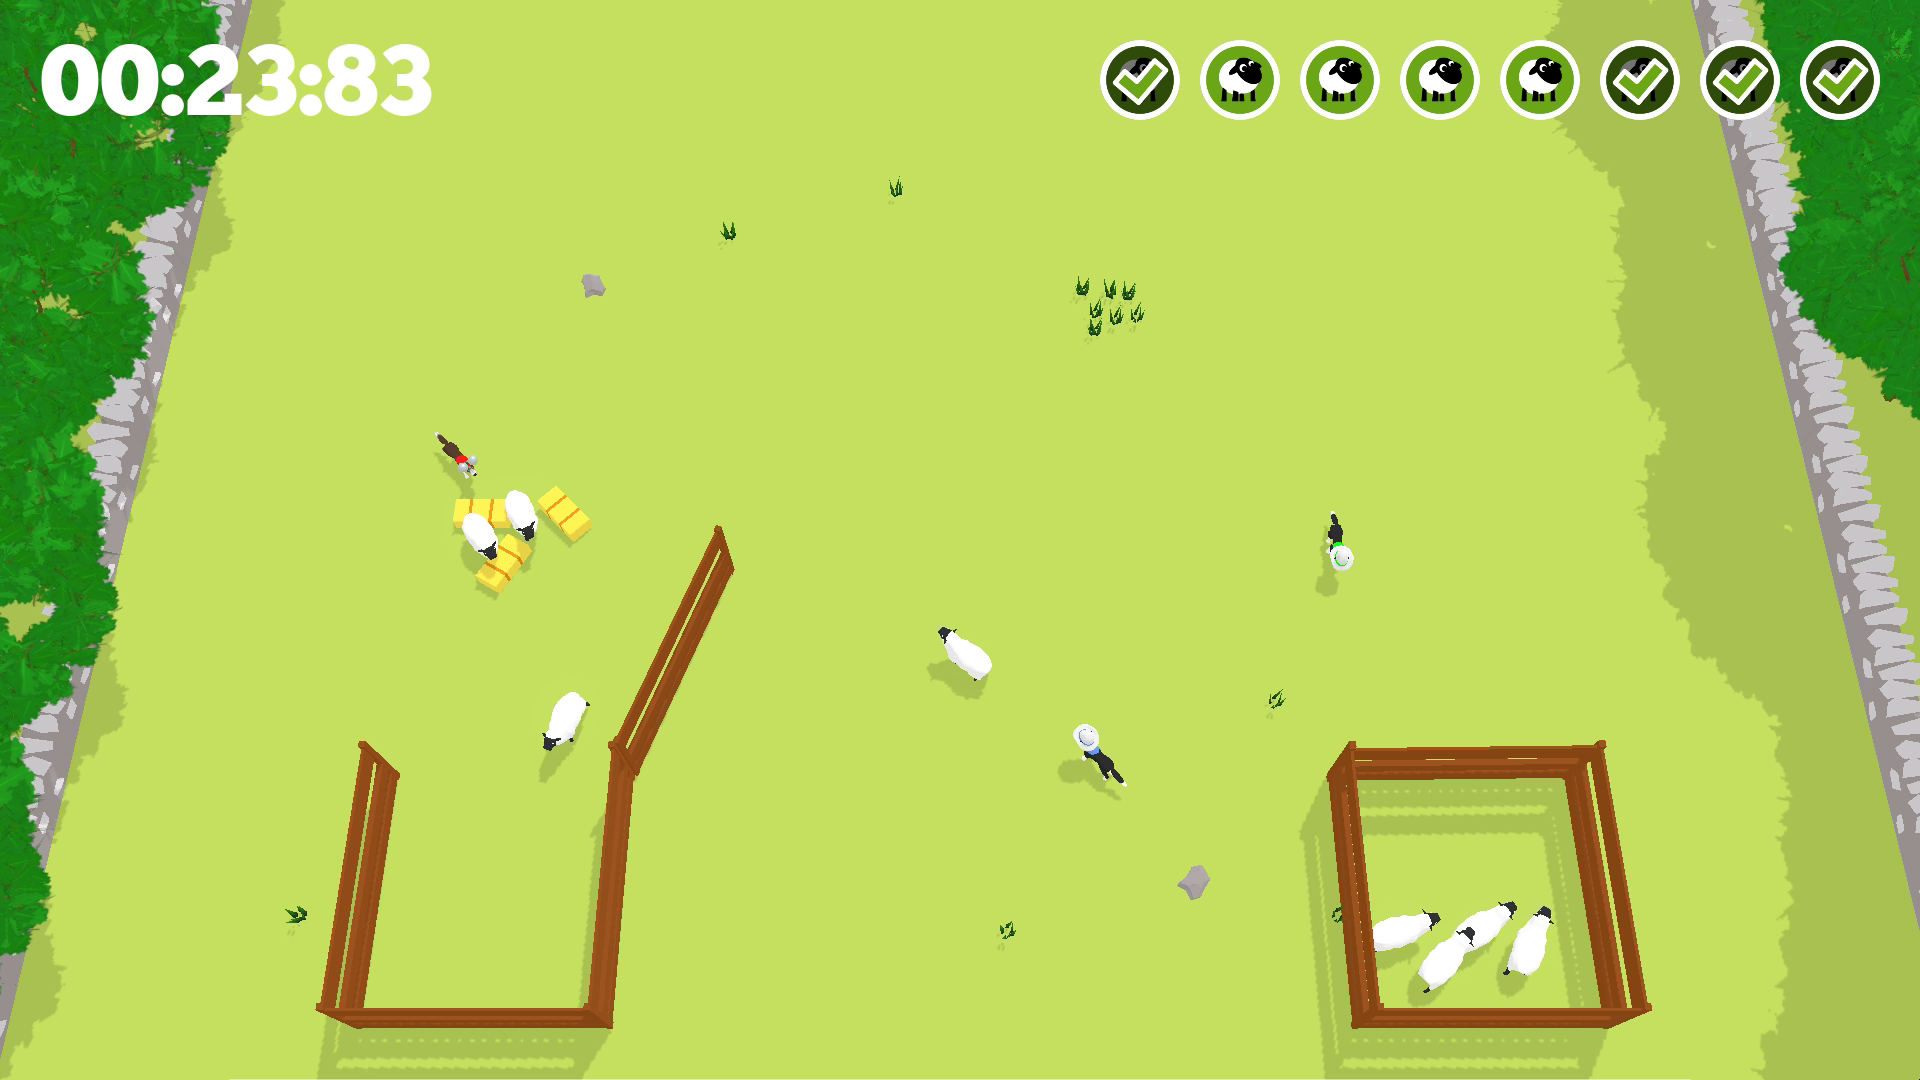 A screenshot of Too Many Sheep. It shows a green field with two pens at the bottom two corners. Various sheep and sheep dogs are scattered about. To the top left corner is a counter for the time that has elapsed in the game.